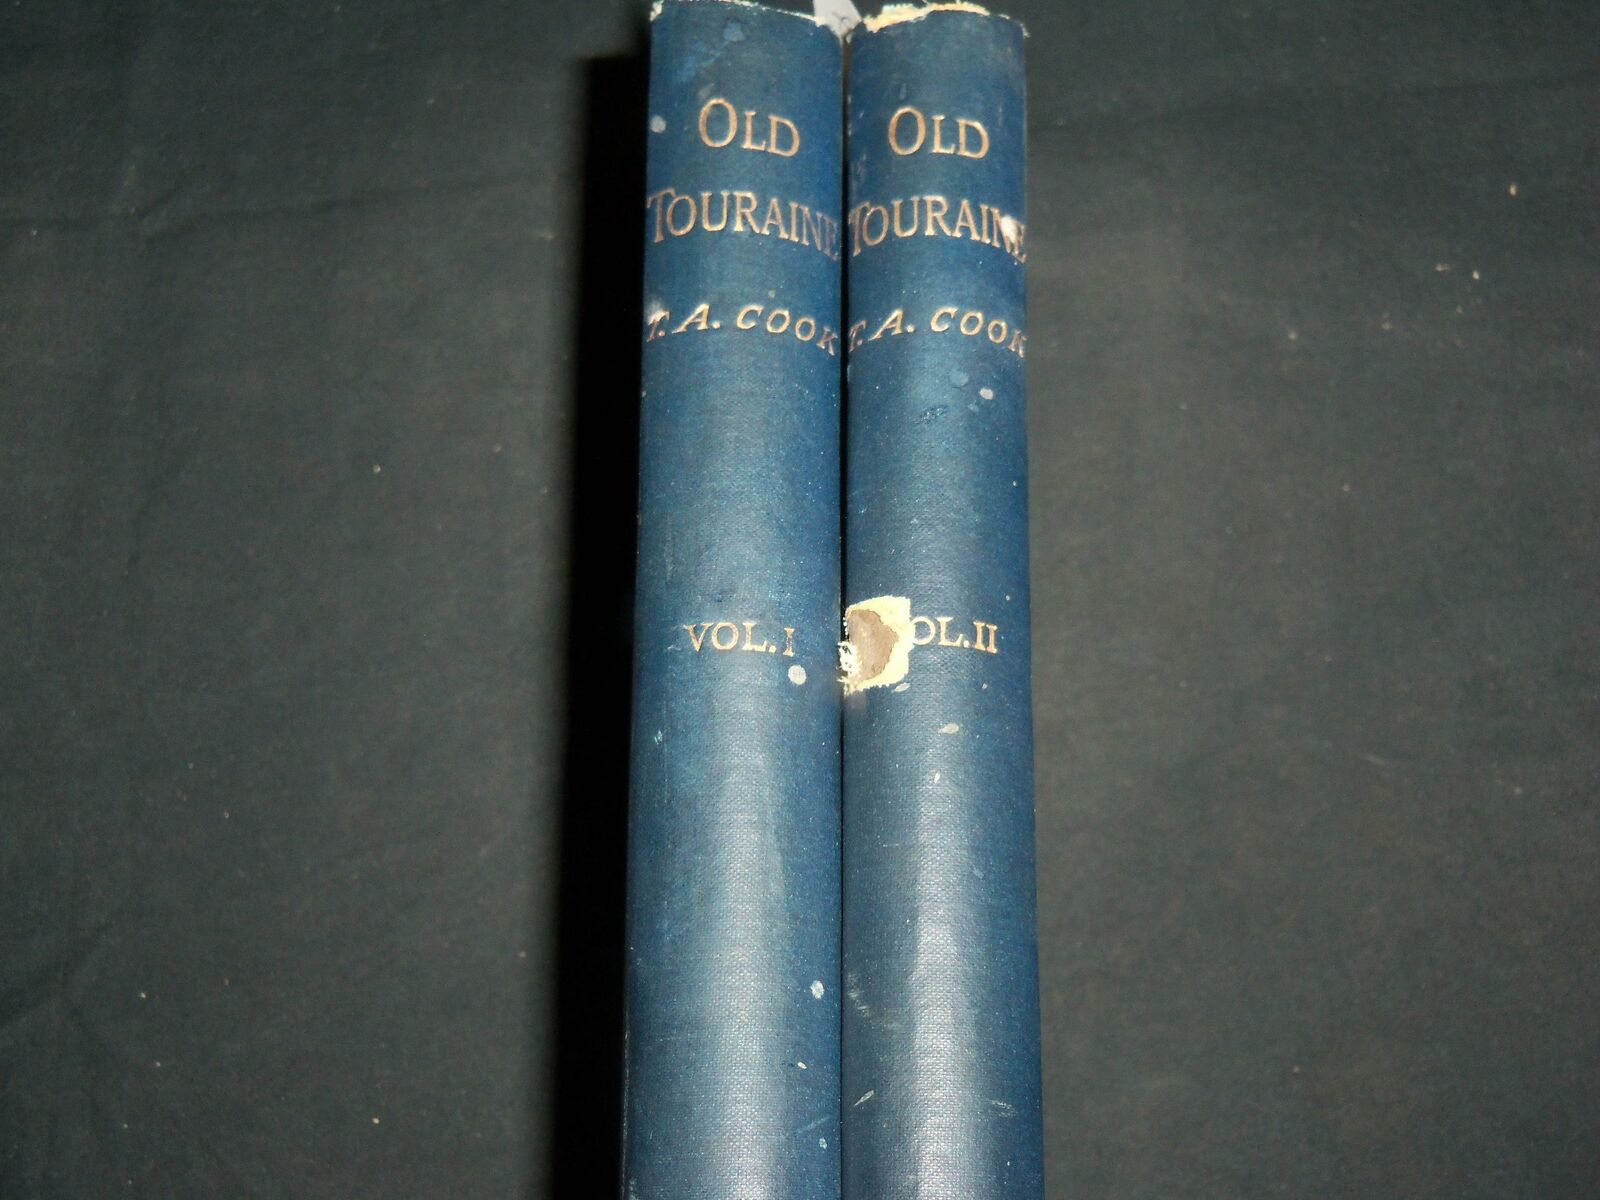 1898 OLD TOURAINE BY T. A. COOK SET OF 2 VOLUMES - THIRD EDITION - KD 6740